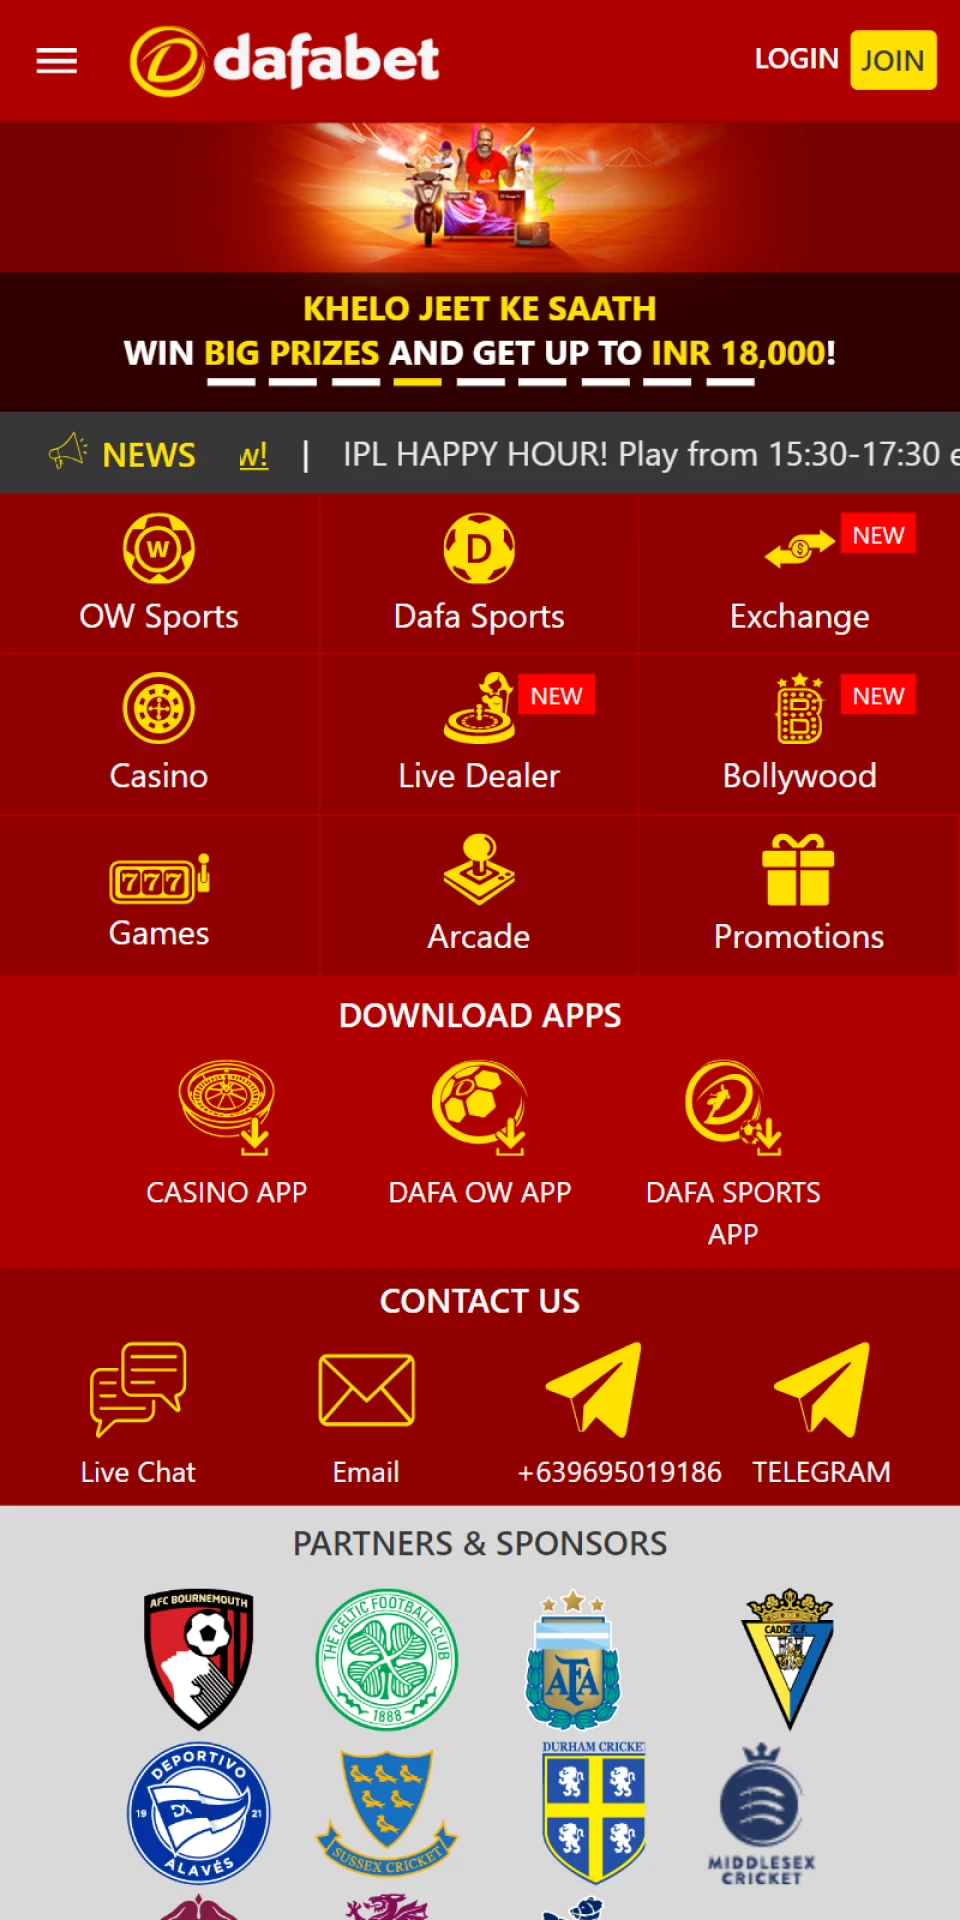 Visit the Dafabet official website to install the app.